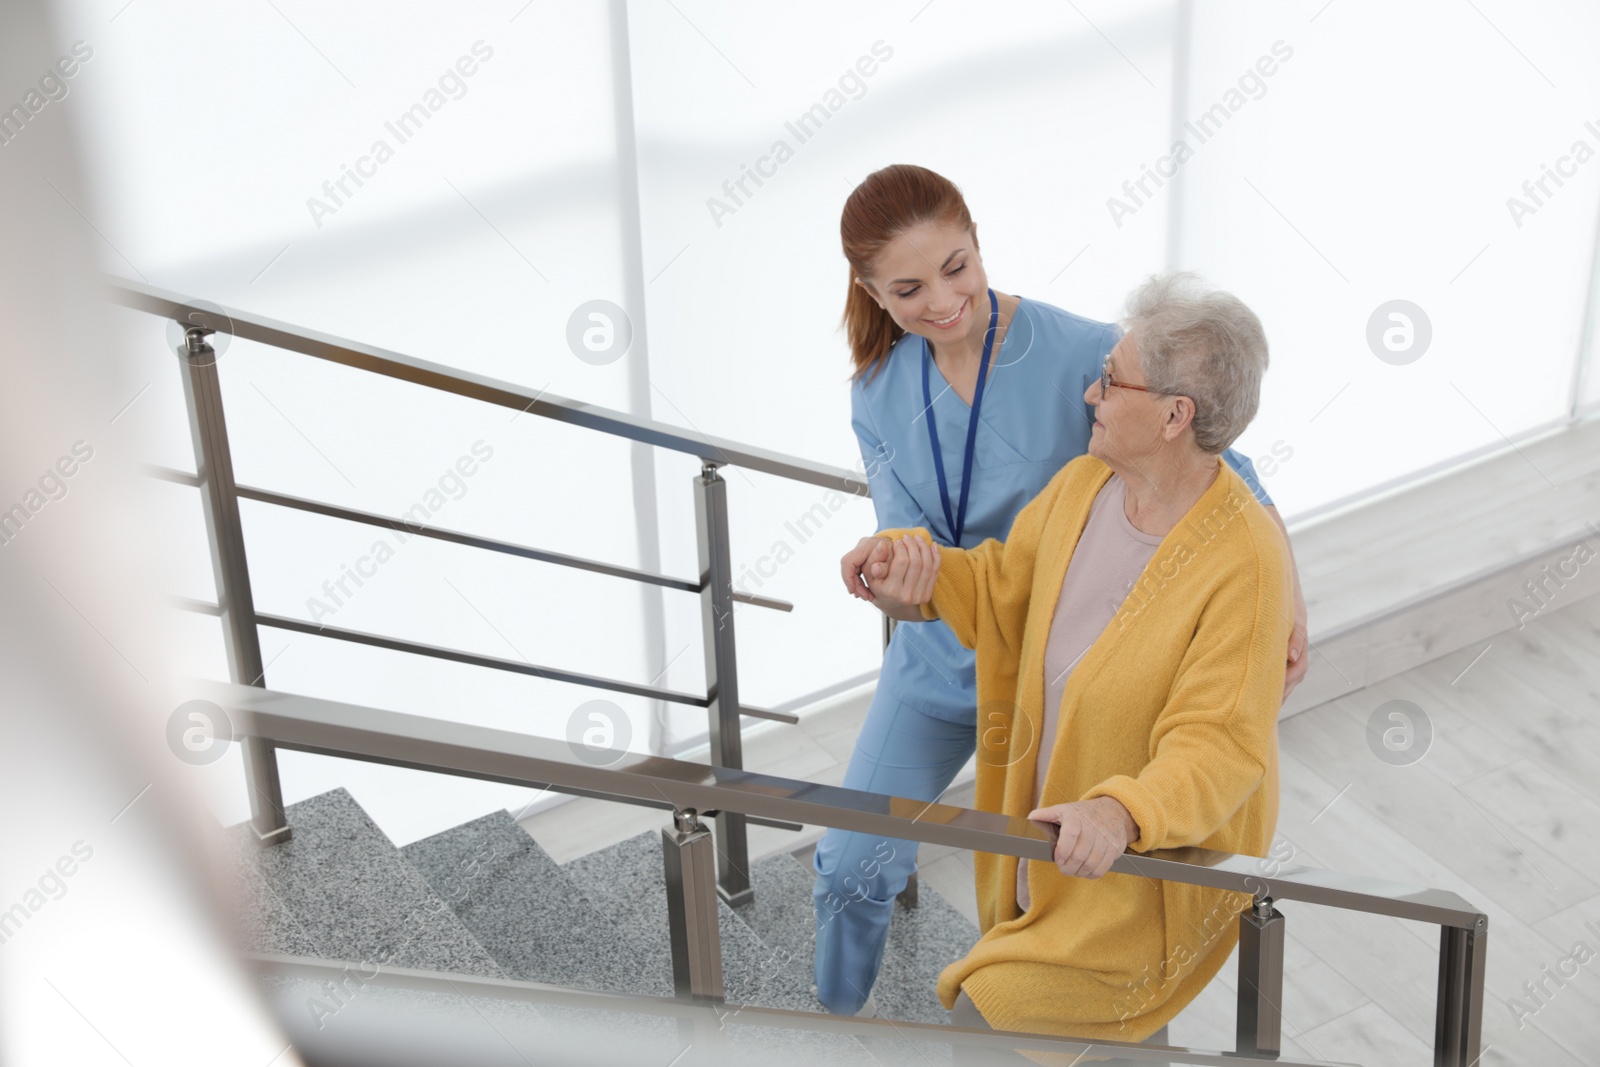 Photo of Nurse assisting senior woman to go up stairs at hospital